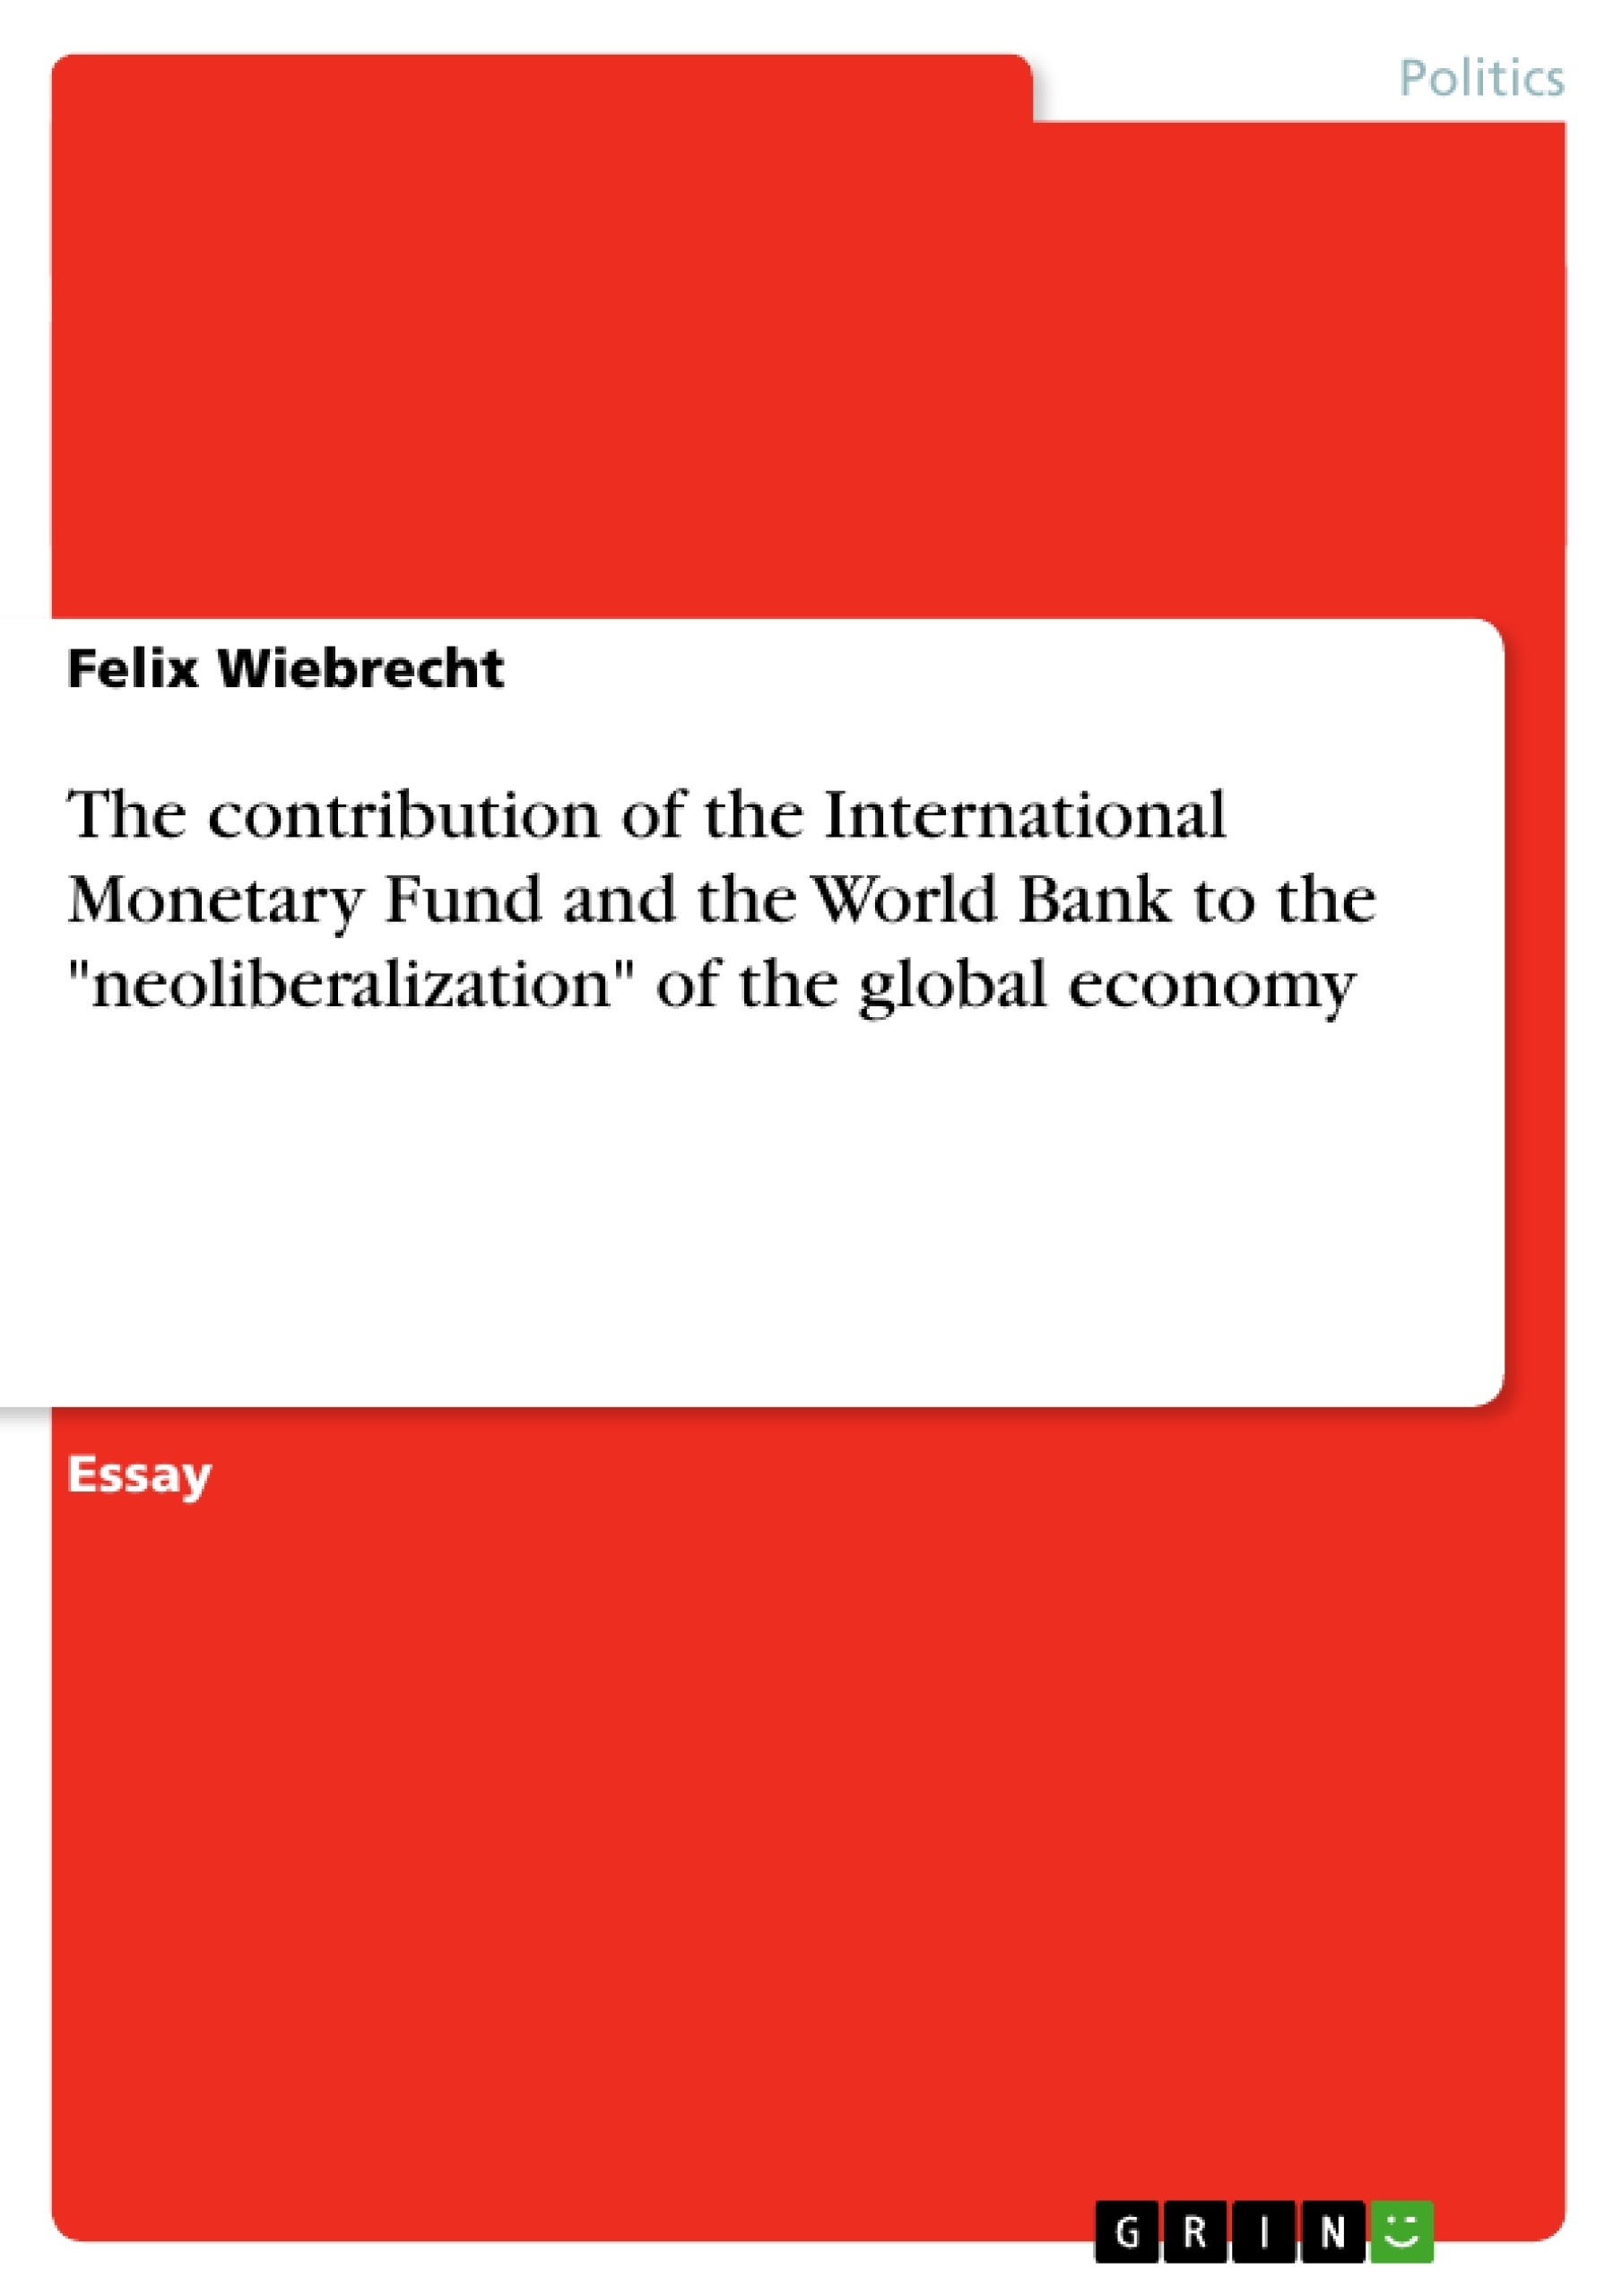 Titre: The contribution of the International Monetary Fund and the World Bank to the "neoliberalization" of the global economy